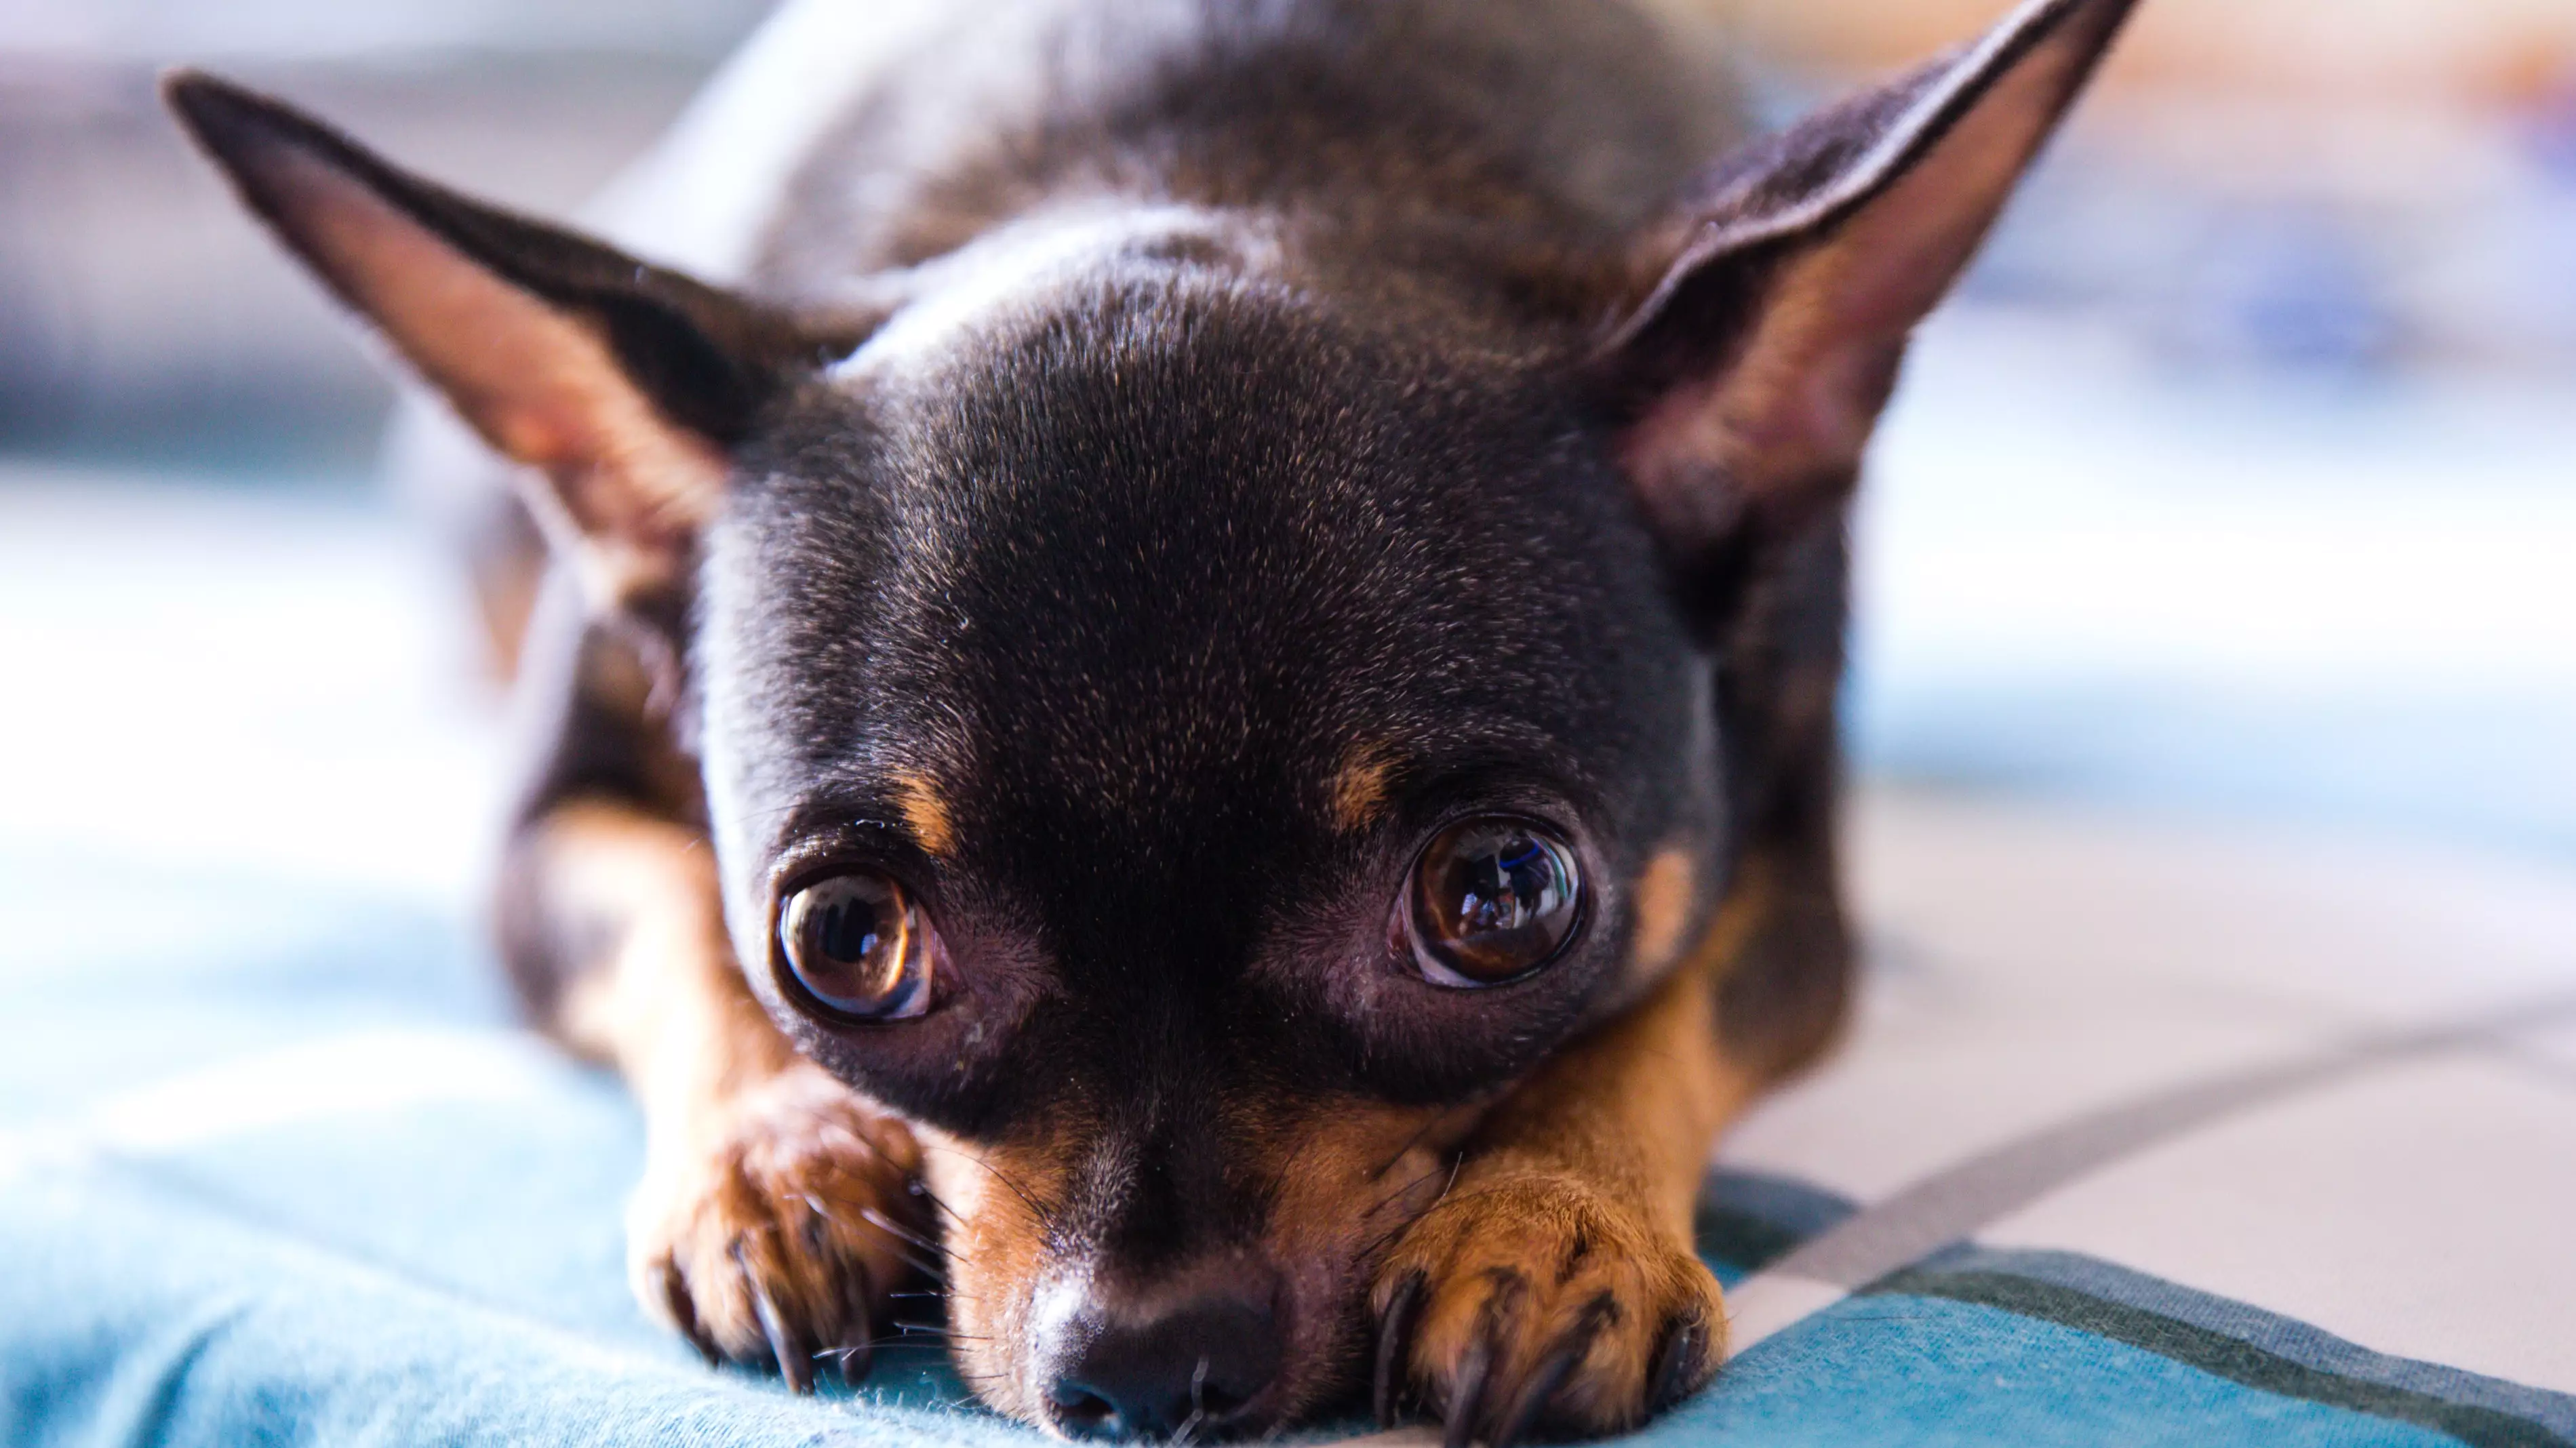 Cruel Breeders Have Been Cutting Tiny Dogs' Vocal Cords To Stop Them Barking